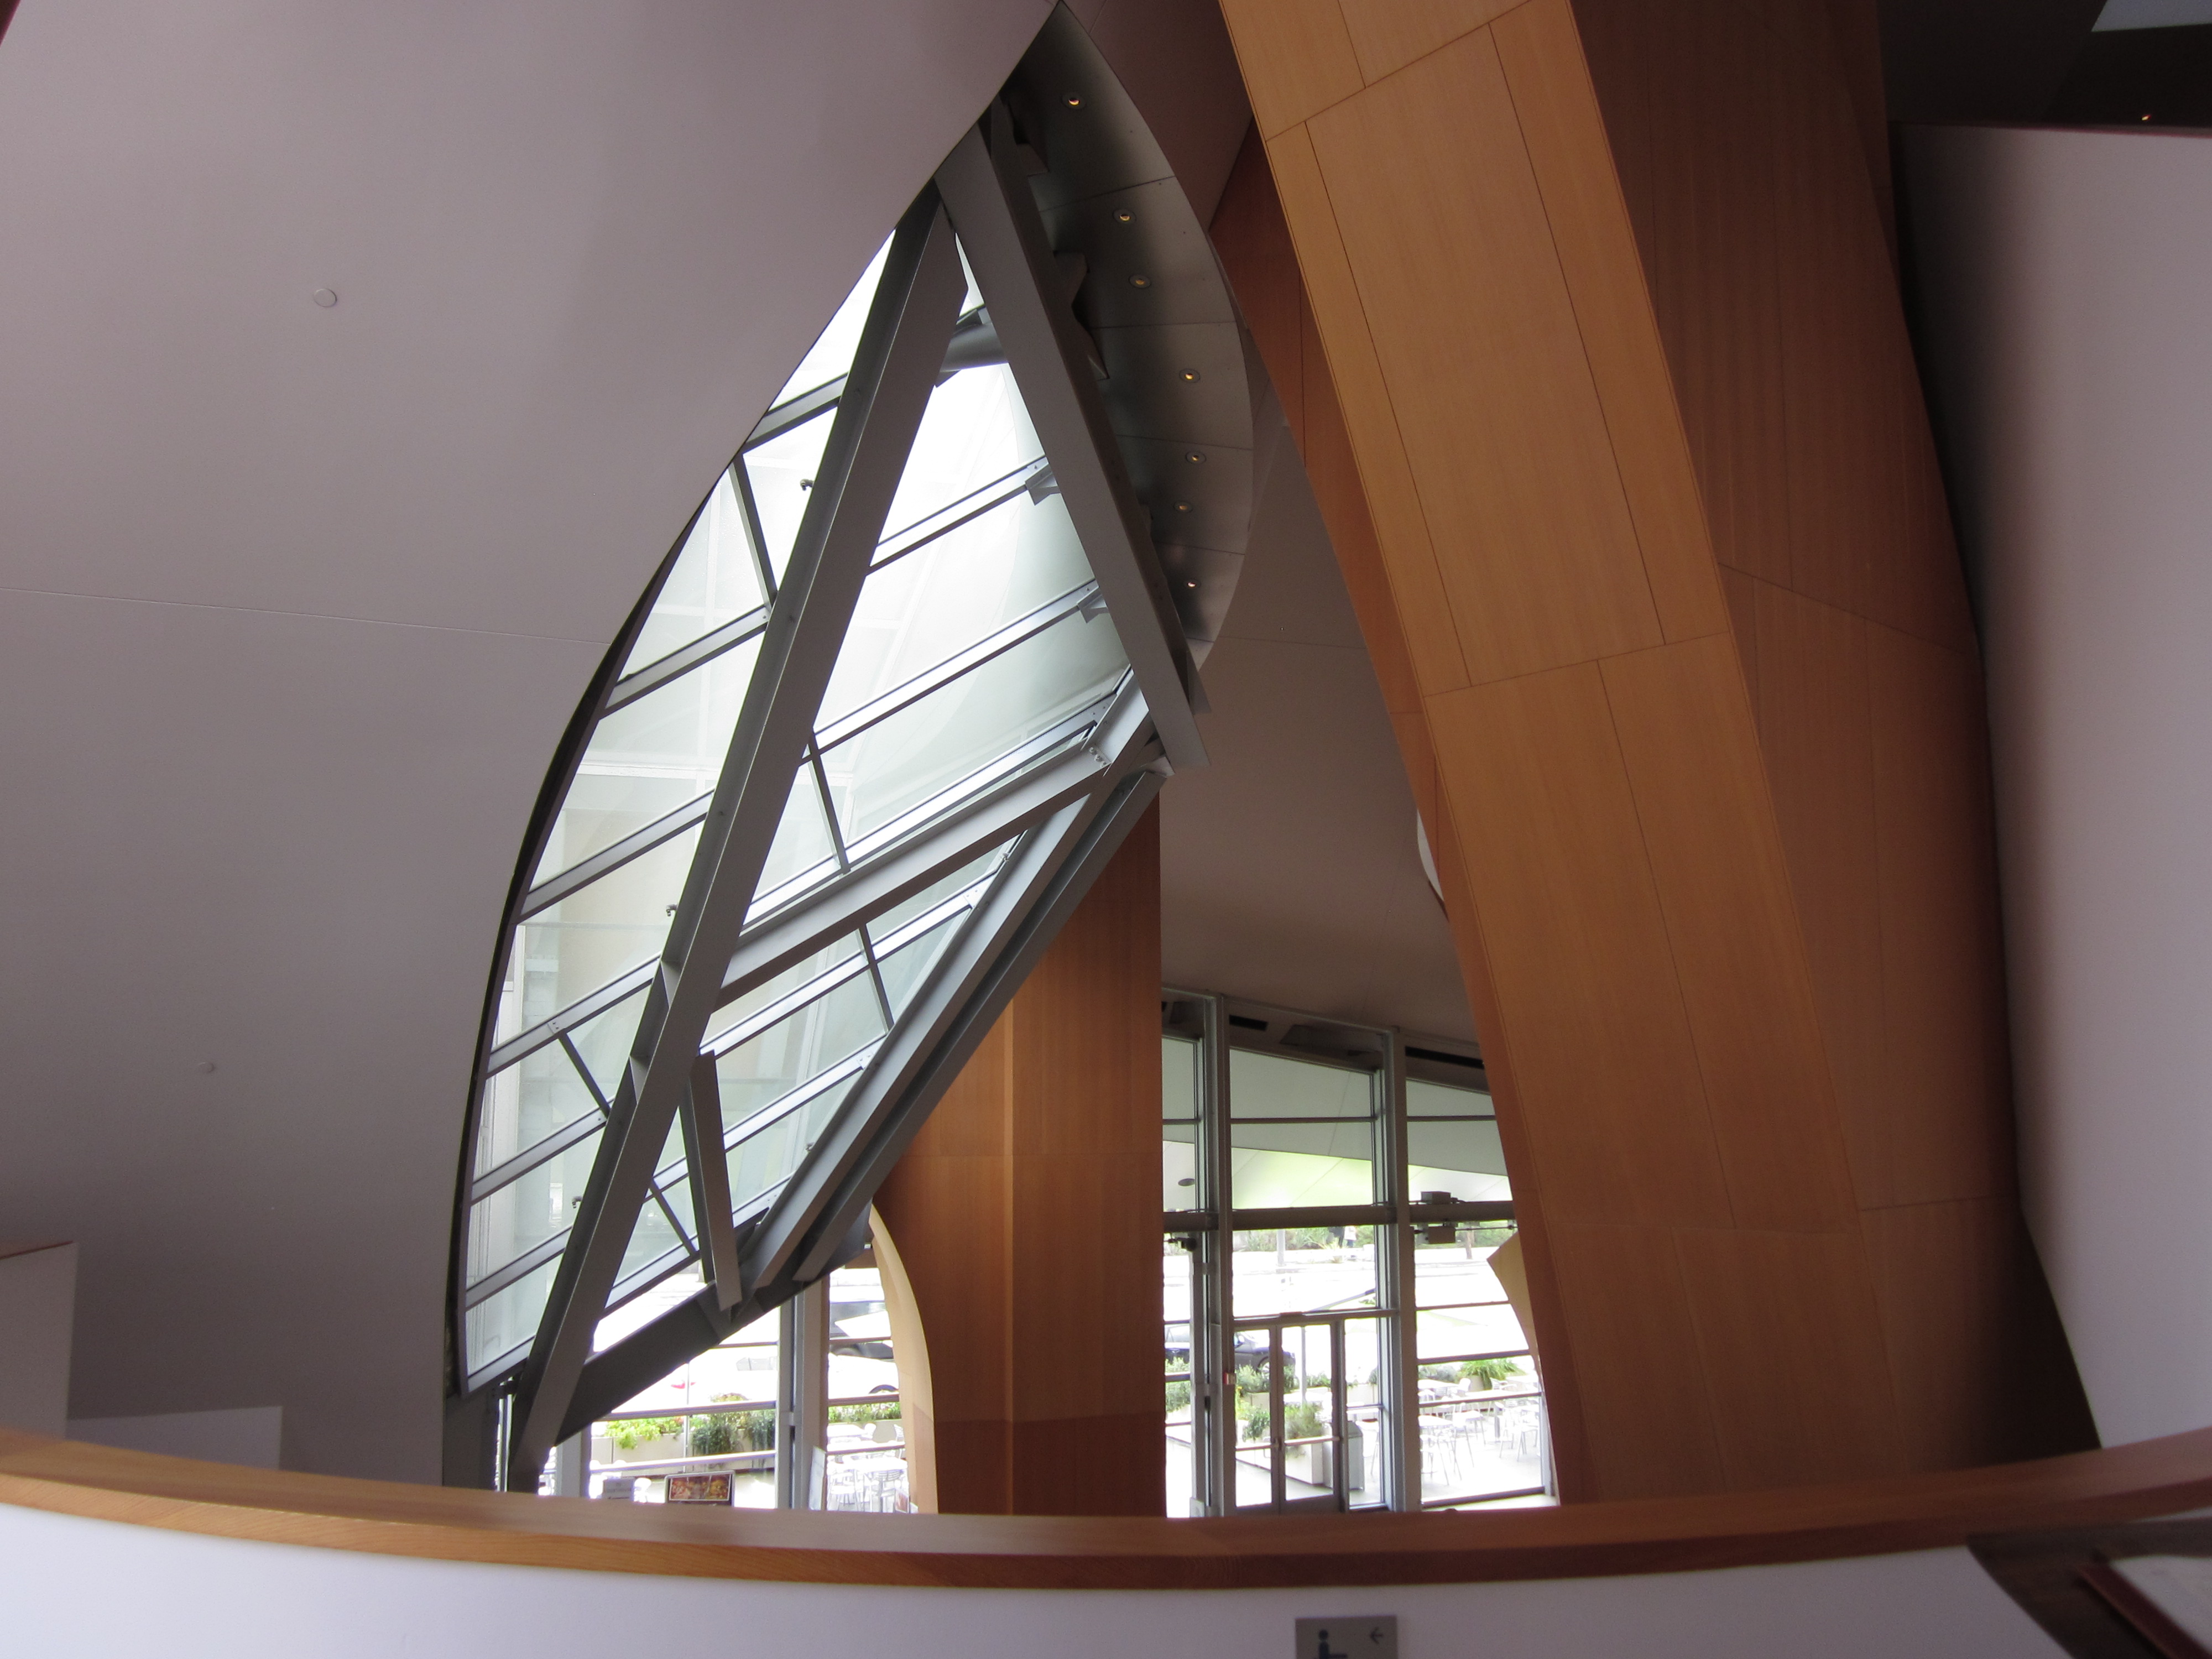 Inside the Walt Disney Concert Hall | Uncouth Reflections